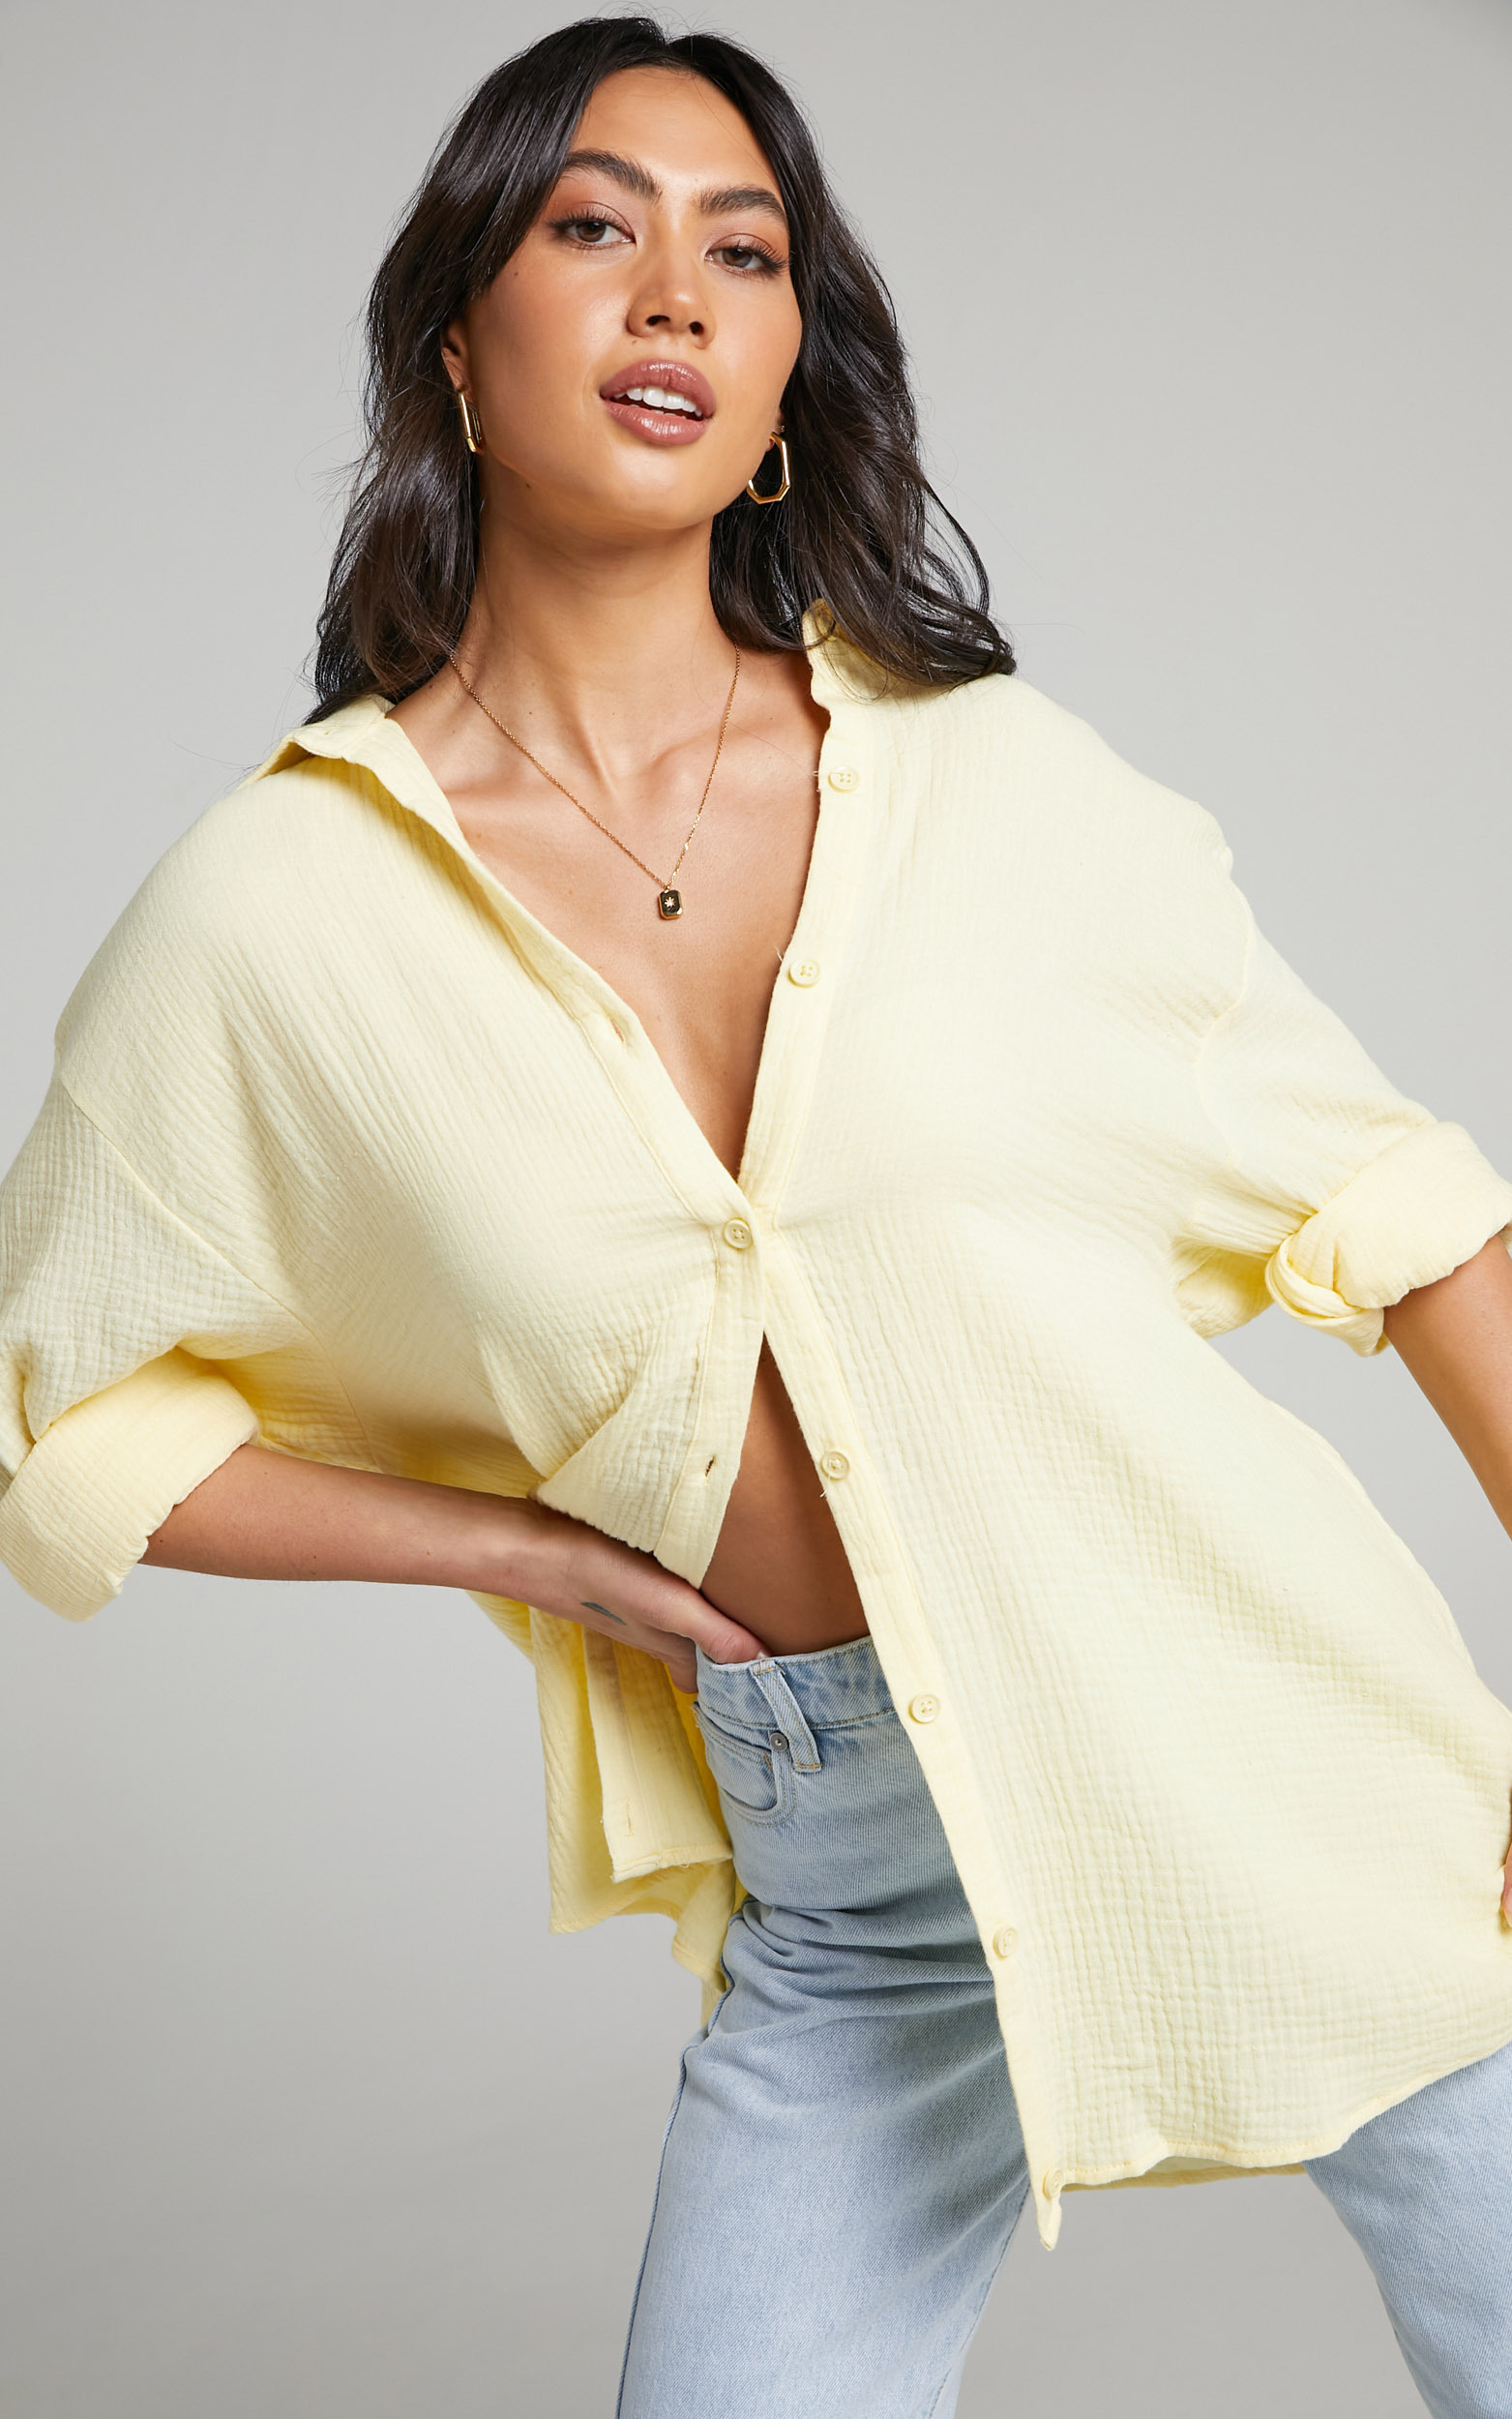 Yvaine Oversized Long Sleeve Button Up Shirt in Lemon - 06, YEL2, hi-res image number null